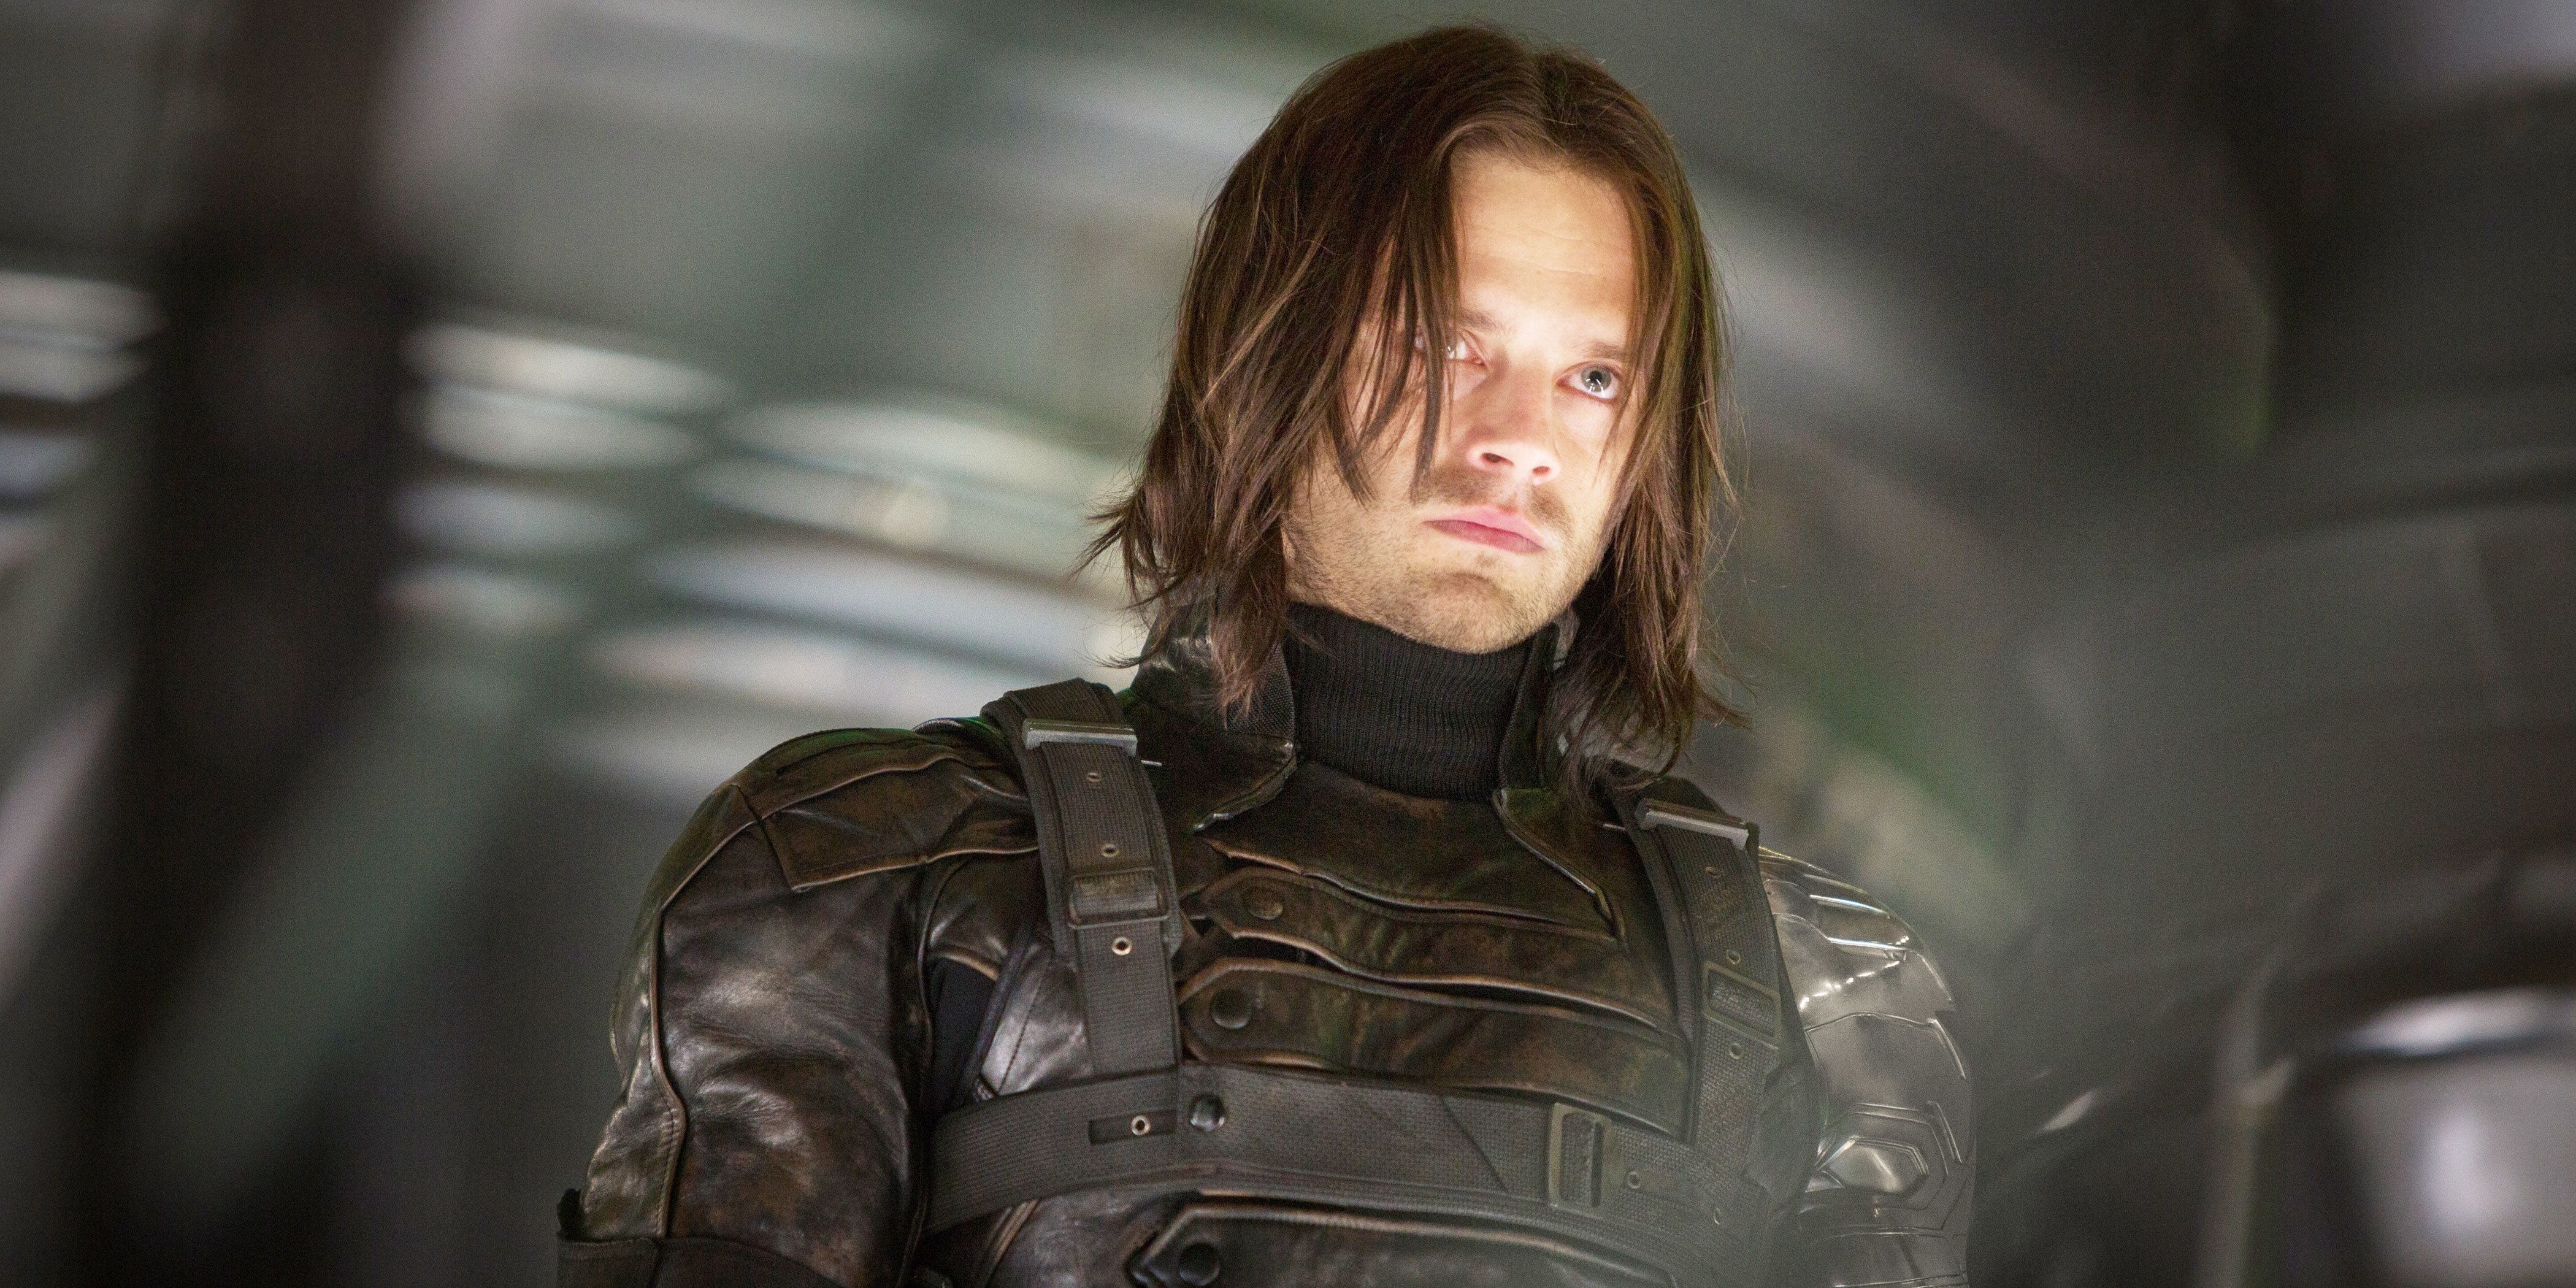 Mcu How Did Bucky Barnes Become The Winter Soldier